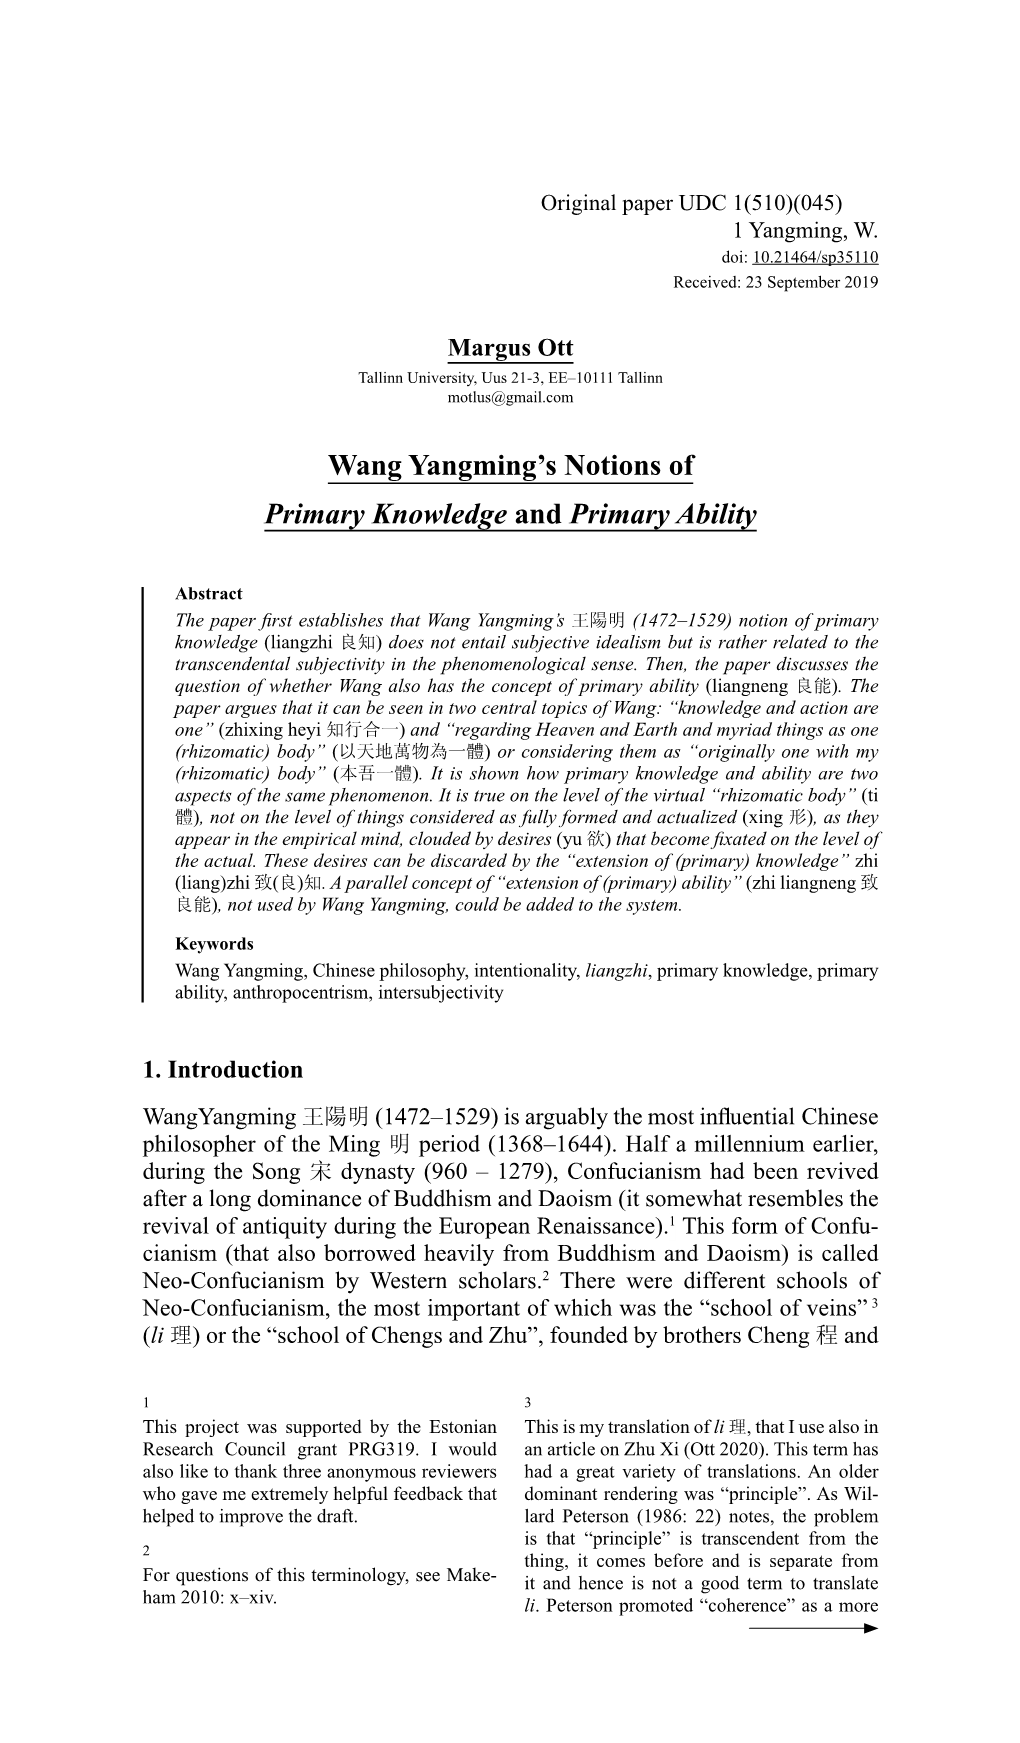 Wang Yangming's Notions of Primary Knowledge and Primary Ability